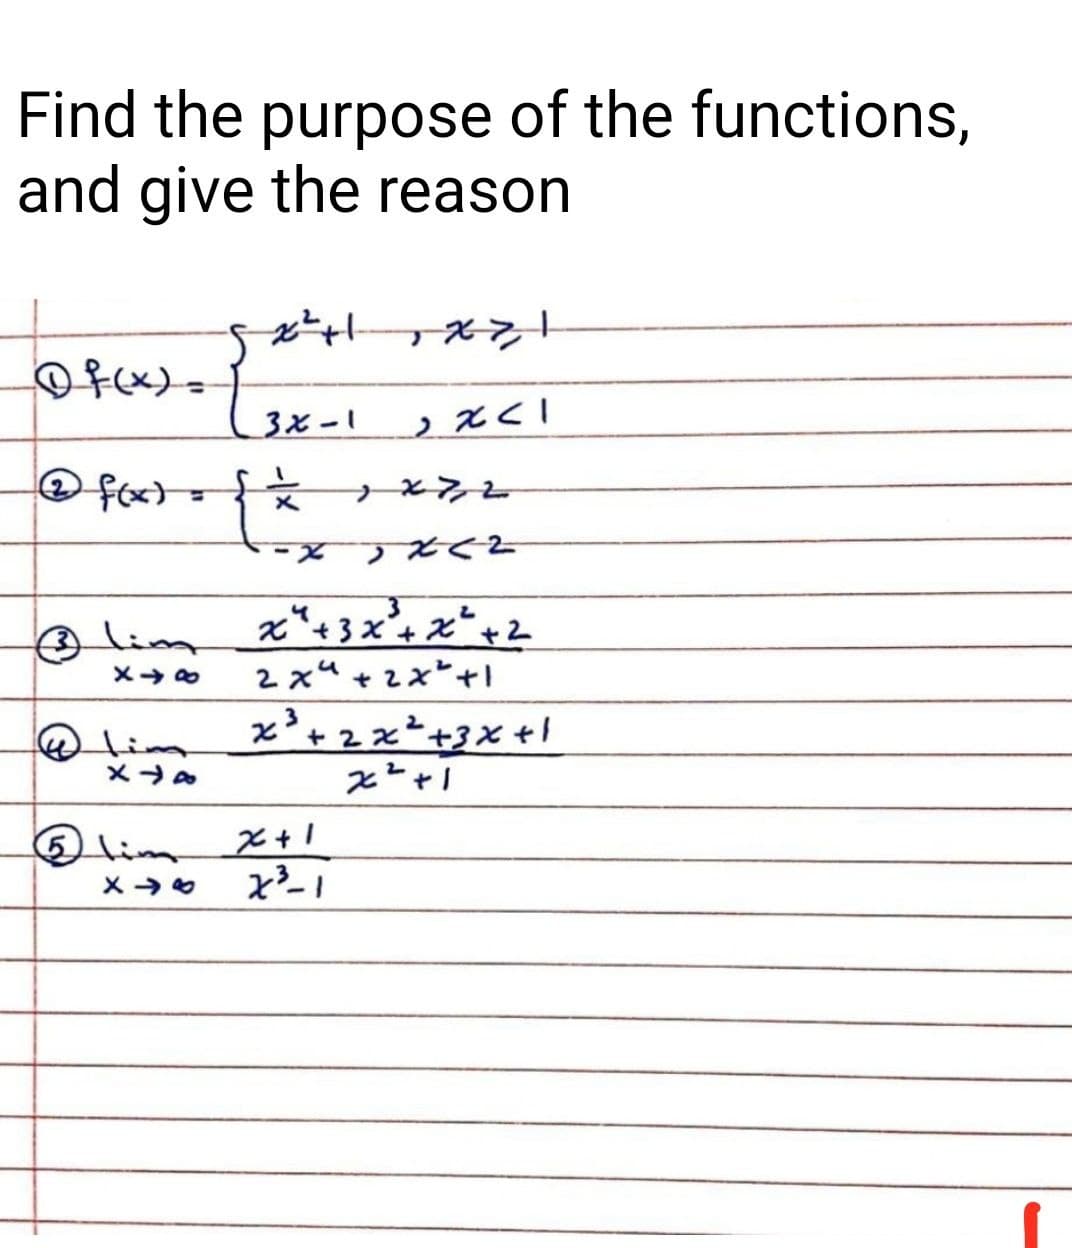 Find the purpose of the functions,
and give the reason
Ofcx)=
3x-1
O fx)={
→とンと
ーX
x*+3x+x*+2
2 xu +2x*+!
x
☺lim
メ→の
'+zx²+3x +l
のlim
メ→。
「+ュズ
のlim
